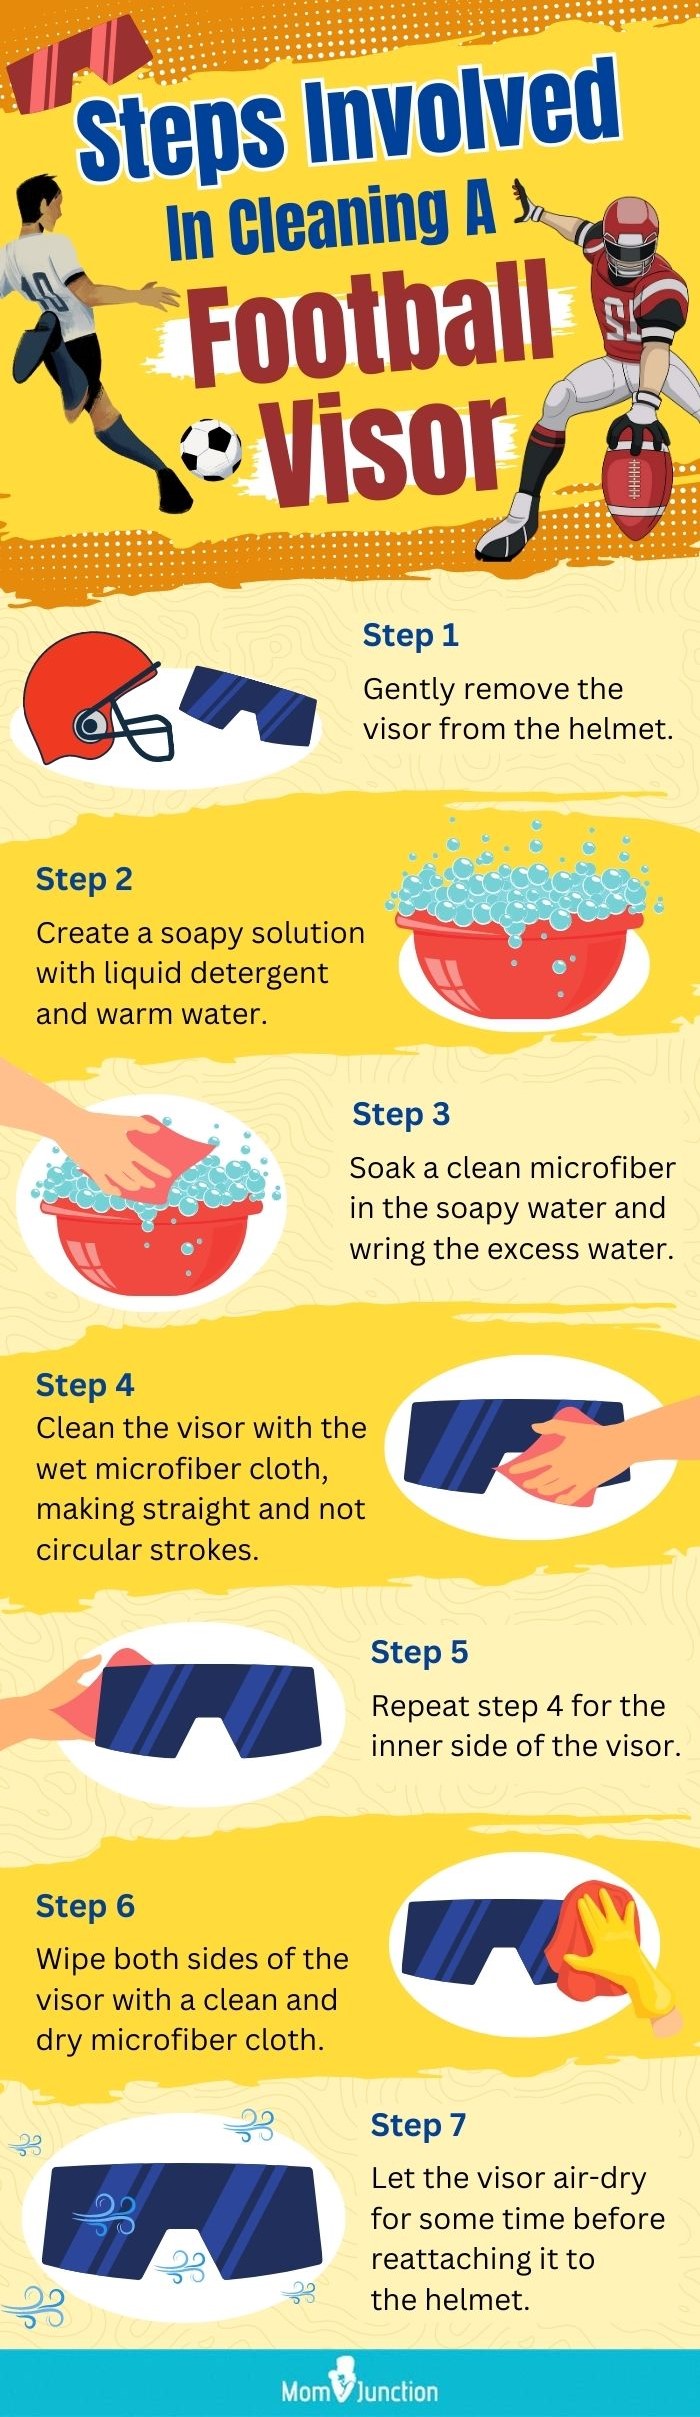 Steps Involved In Cleaning A Football Visor (infographic)